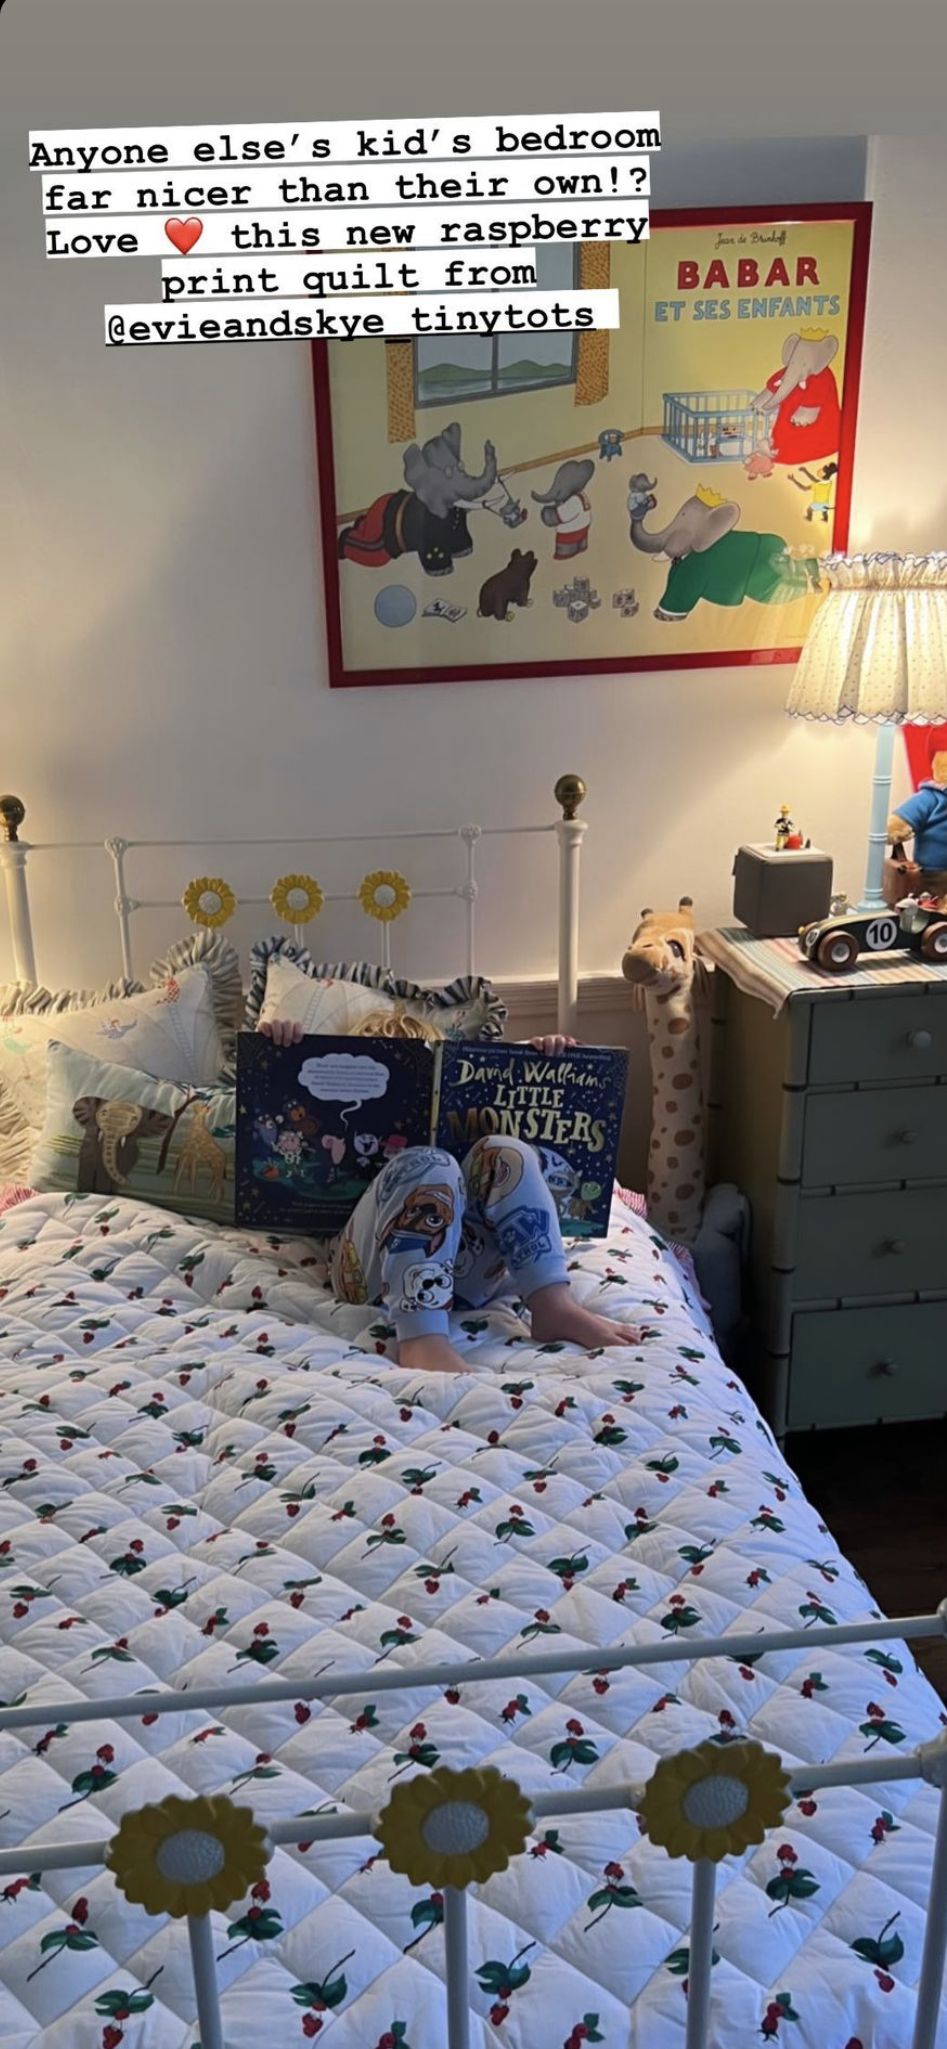 Carrie and Boris Johnson’s son Wilfred, 3, has essentially the most distinctive bed room decor